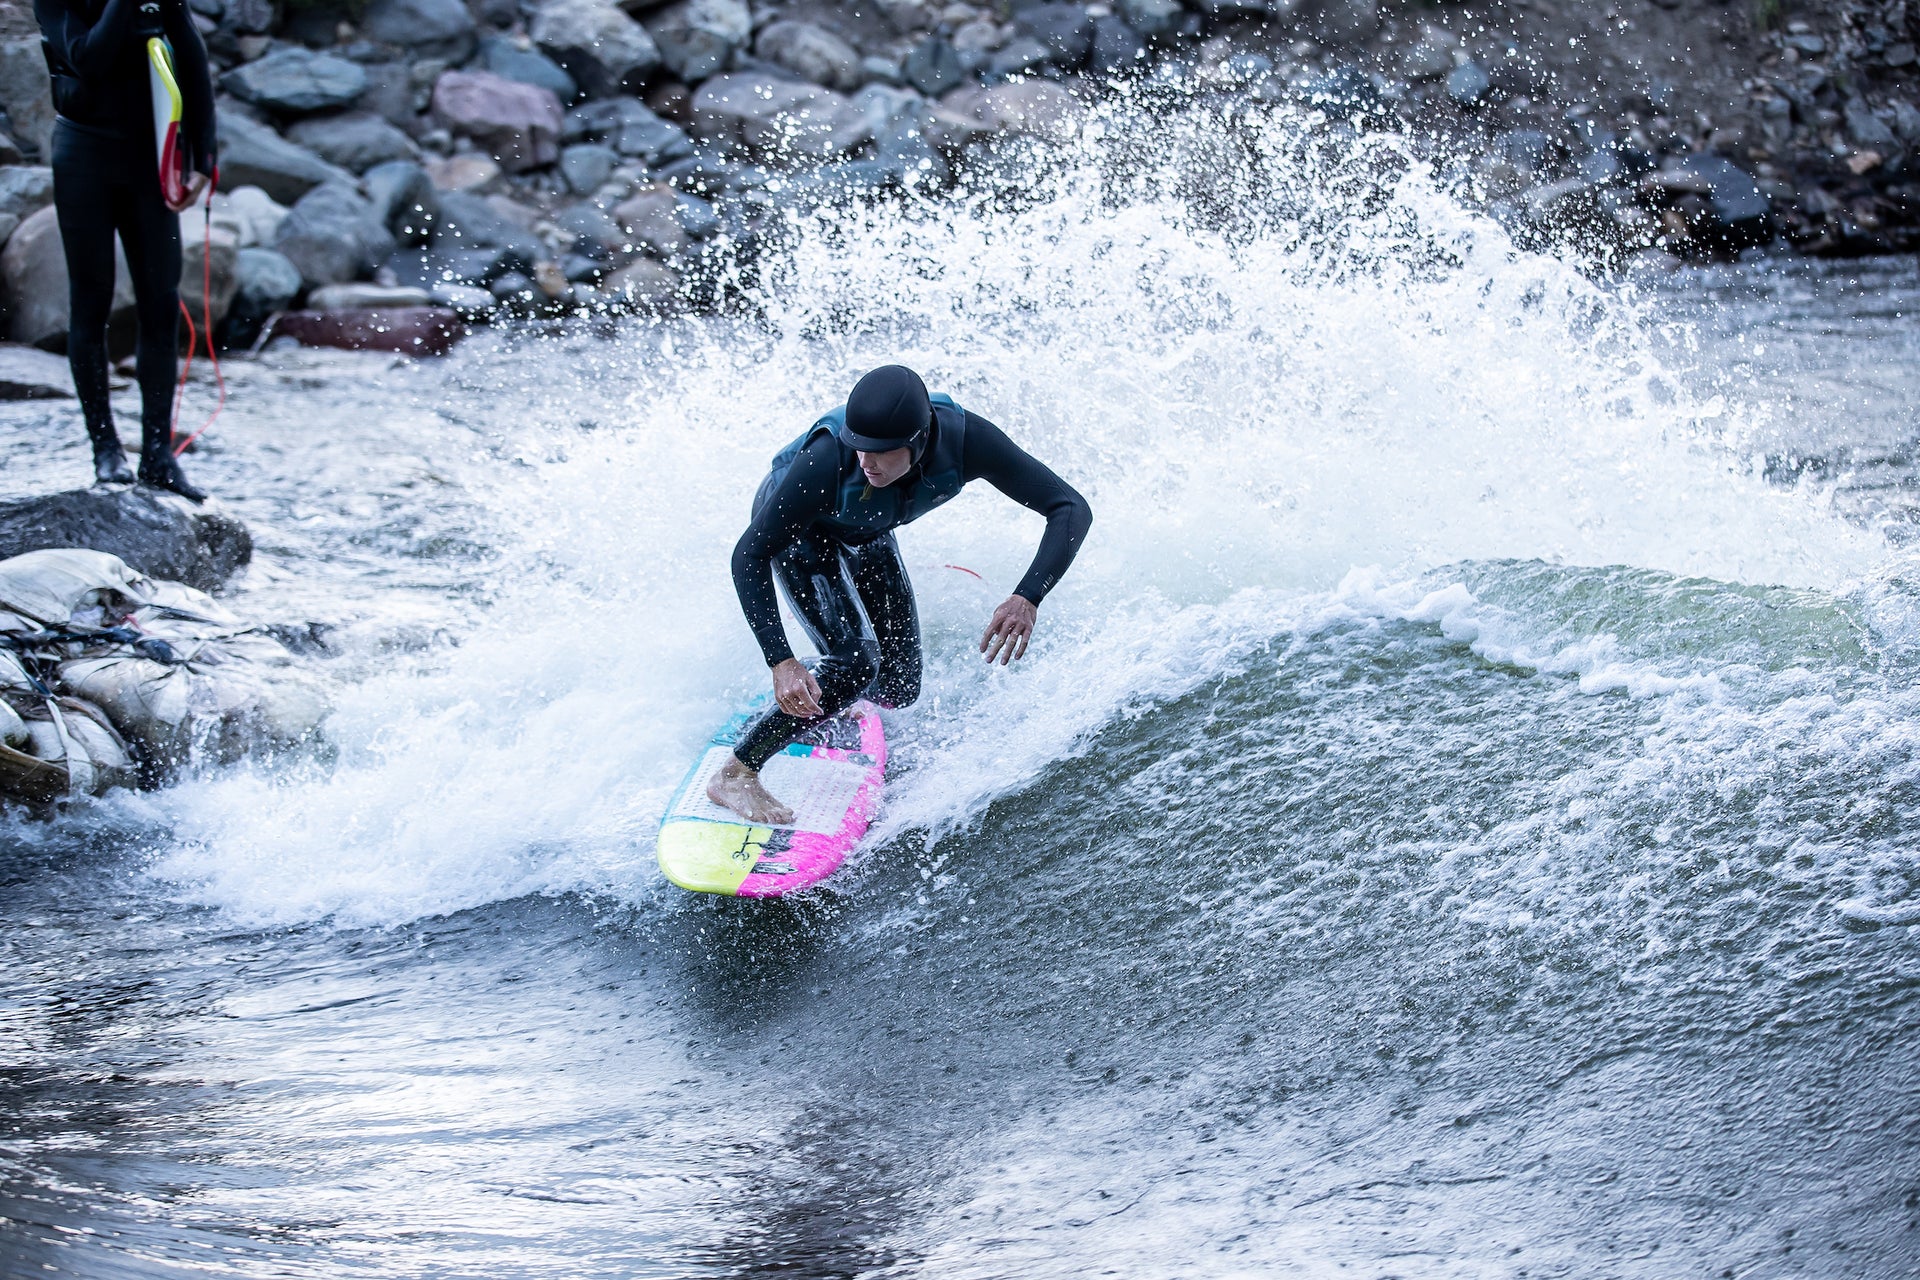 Natural Waves Versus Whitewater Parks: What Type of Wave is Best for River Surfing?